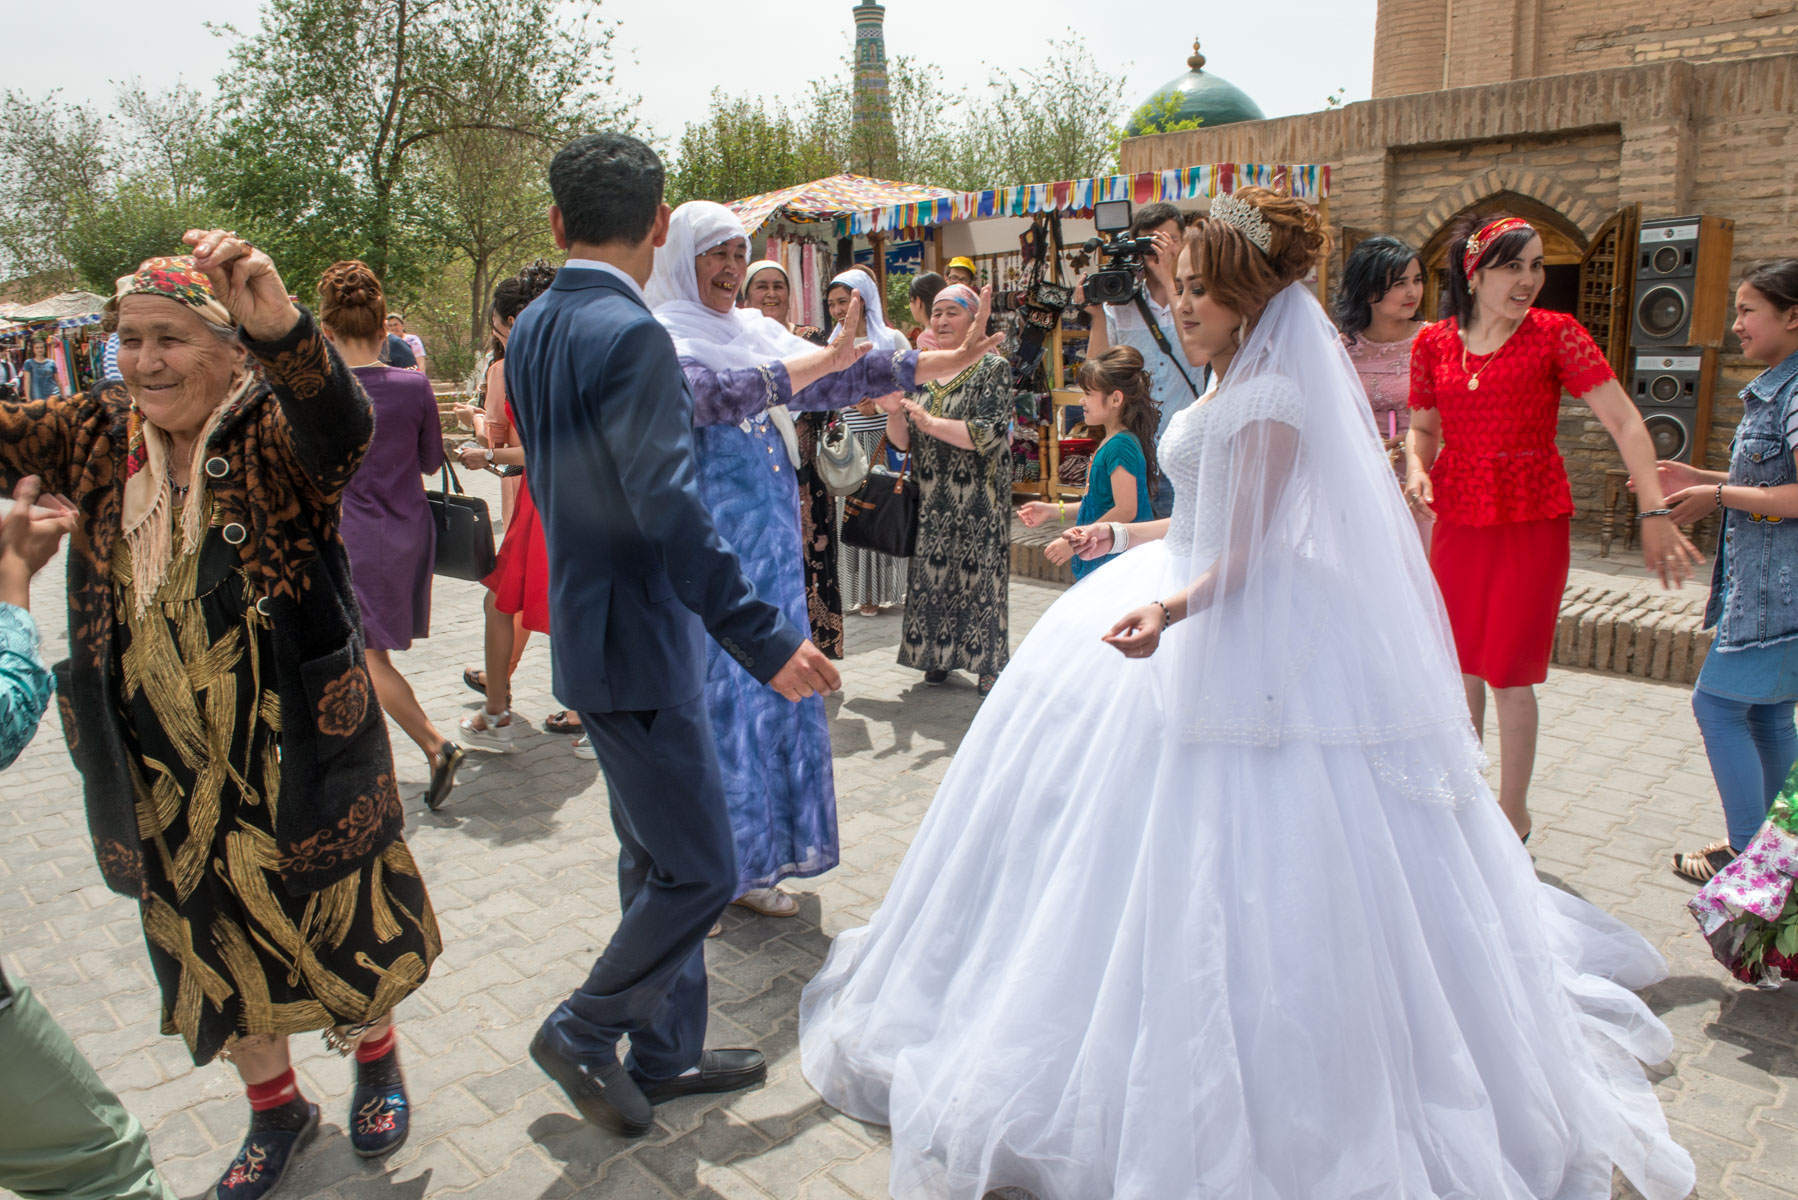 Wedding procession in Khiva old town